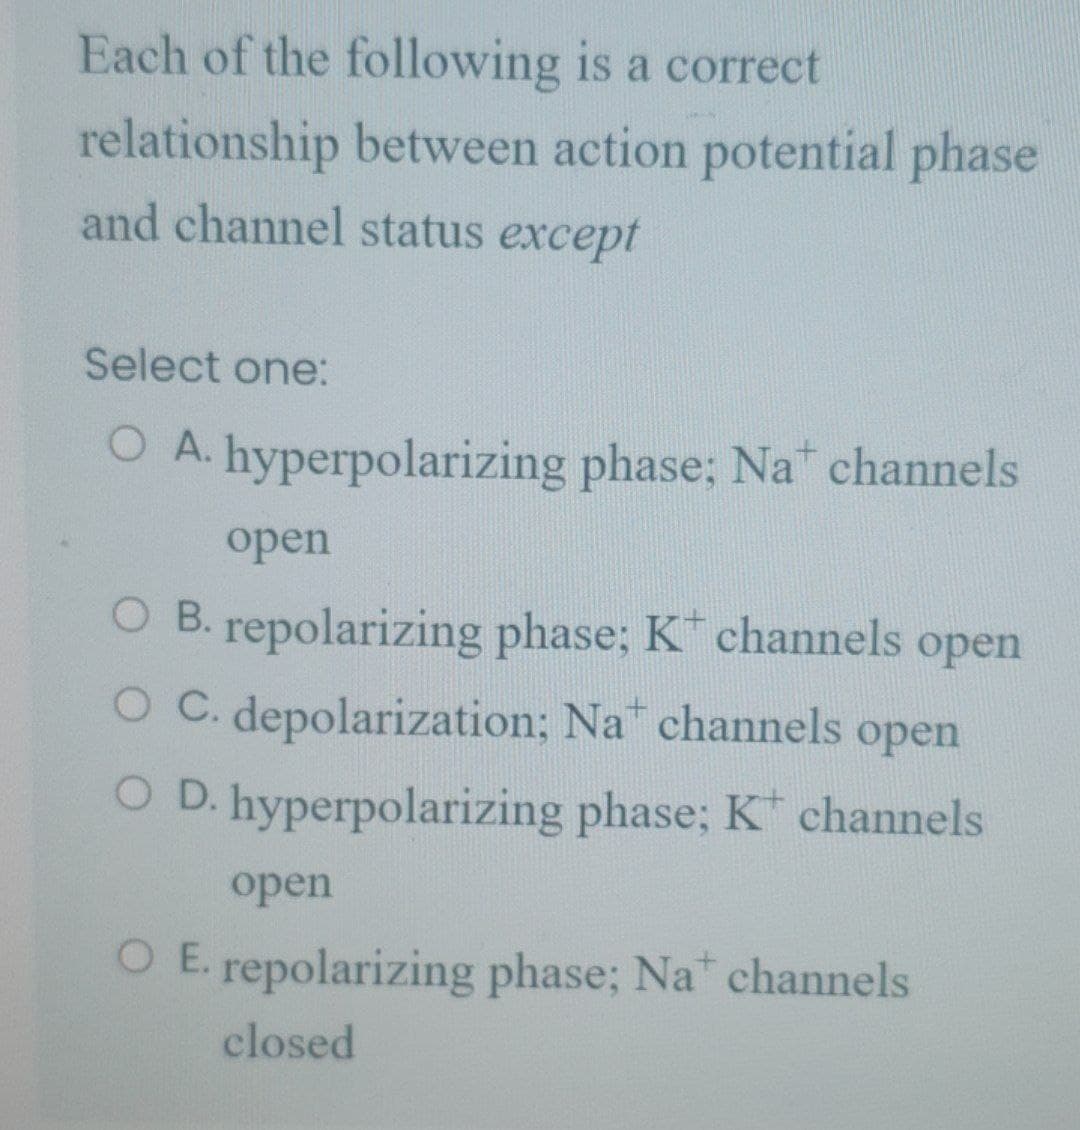 Each of the following is a correct
relationship between action potential phase
and channel status except
Select one:
O A. hyperpolarizing phase; Na channels
open
O B. repolarizing phase; K channels open
O C. depolarization; Na channels open
O D. hyperpolarizing phase; K channels
open
O E. repolarizing phase; Na channels
closed
